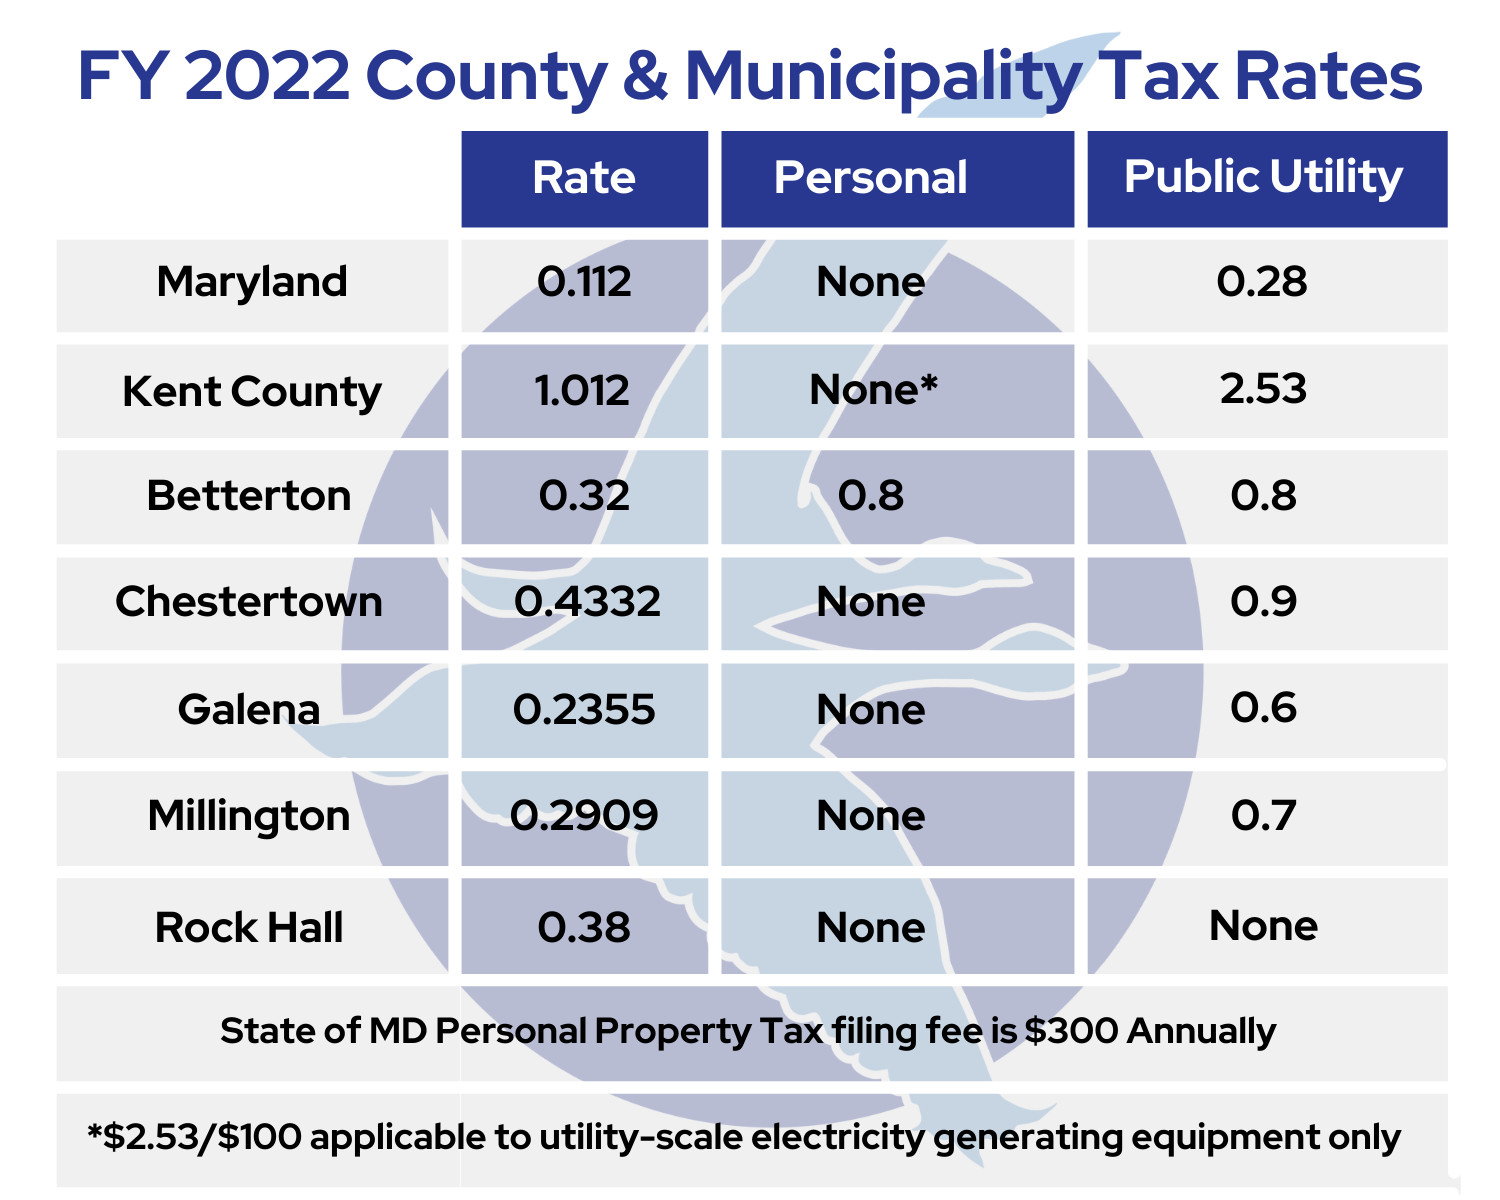 FY 2022 County Municipality Tax Rates